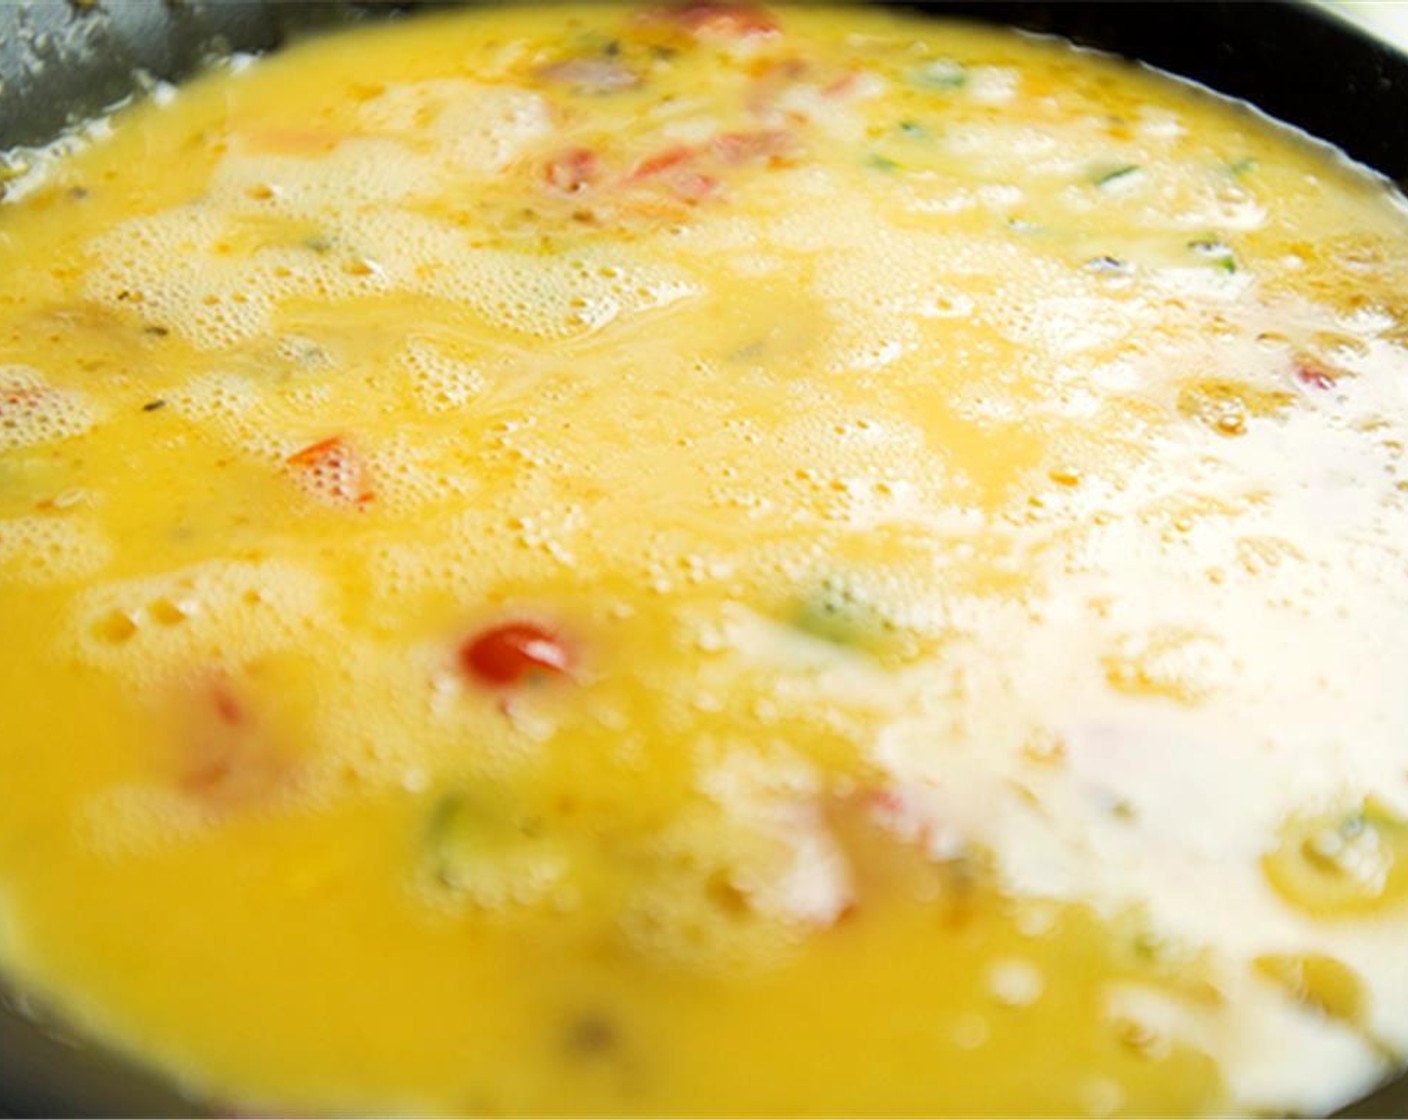 step 5 In a separate bowl, combine the Farmhouse Eggs® Large Brown Eggs (9), Salt (1/4 tsp), and Ground Black Pepper (1/8 tsp) in the bowl and whisk together. Pour egg mixture into pan over veggies stirring gently.